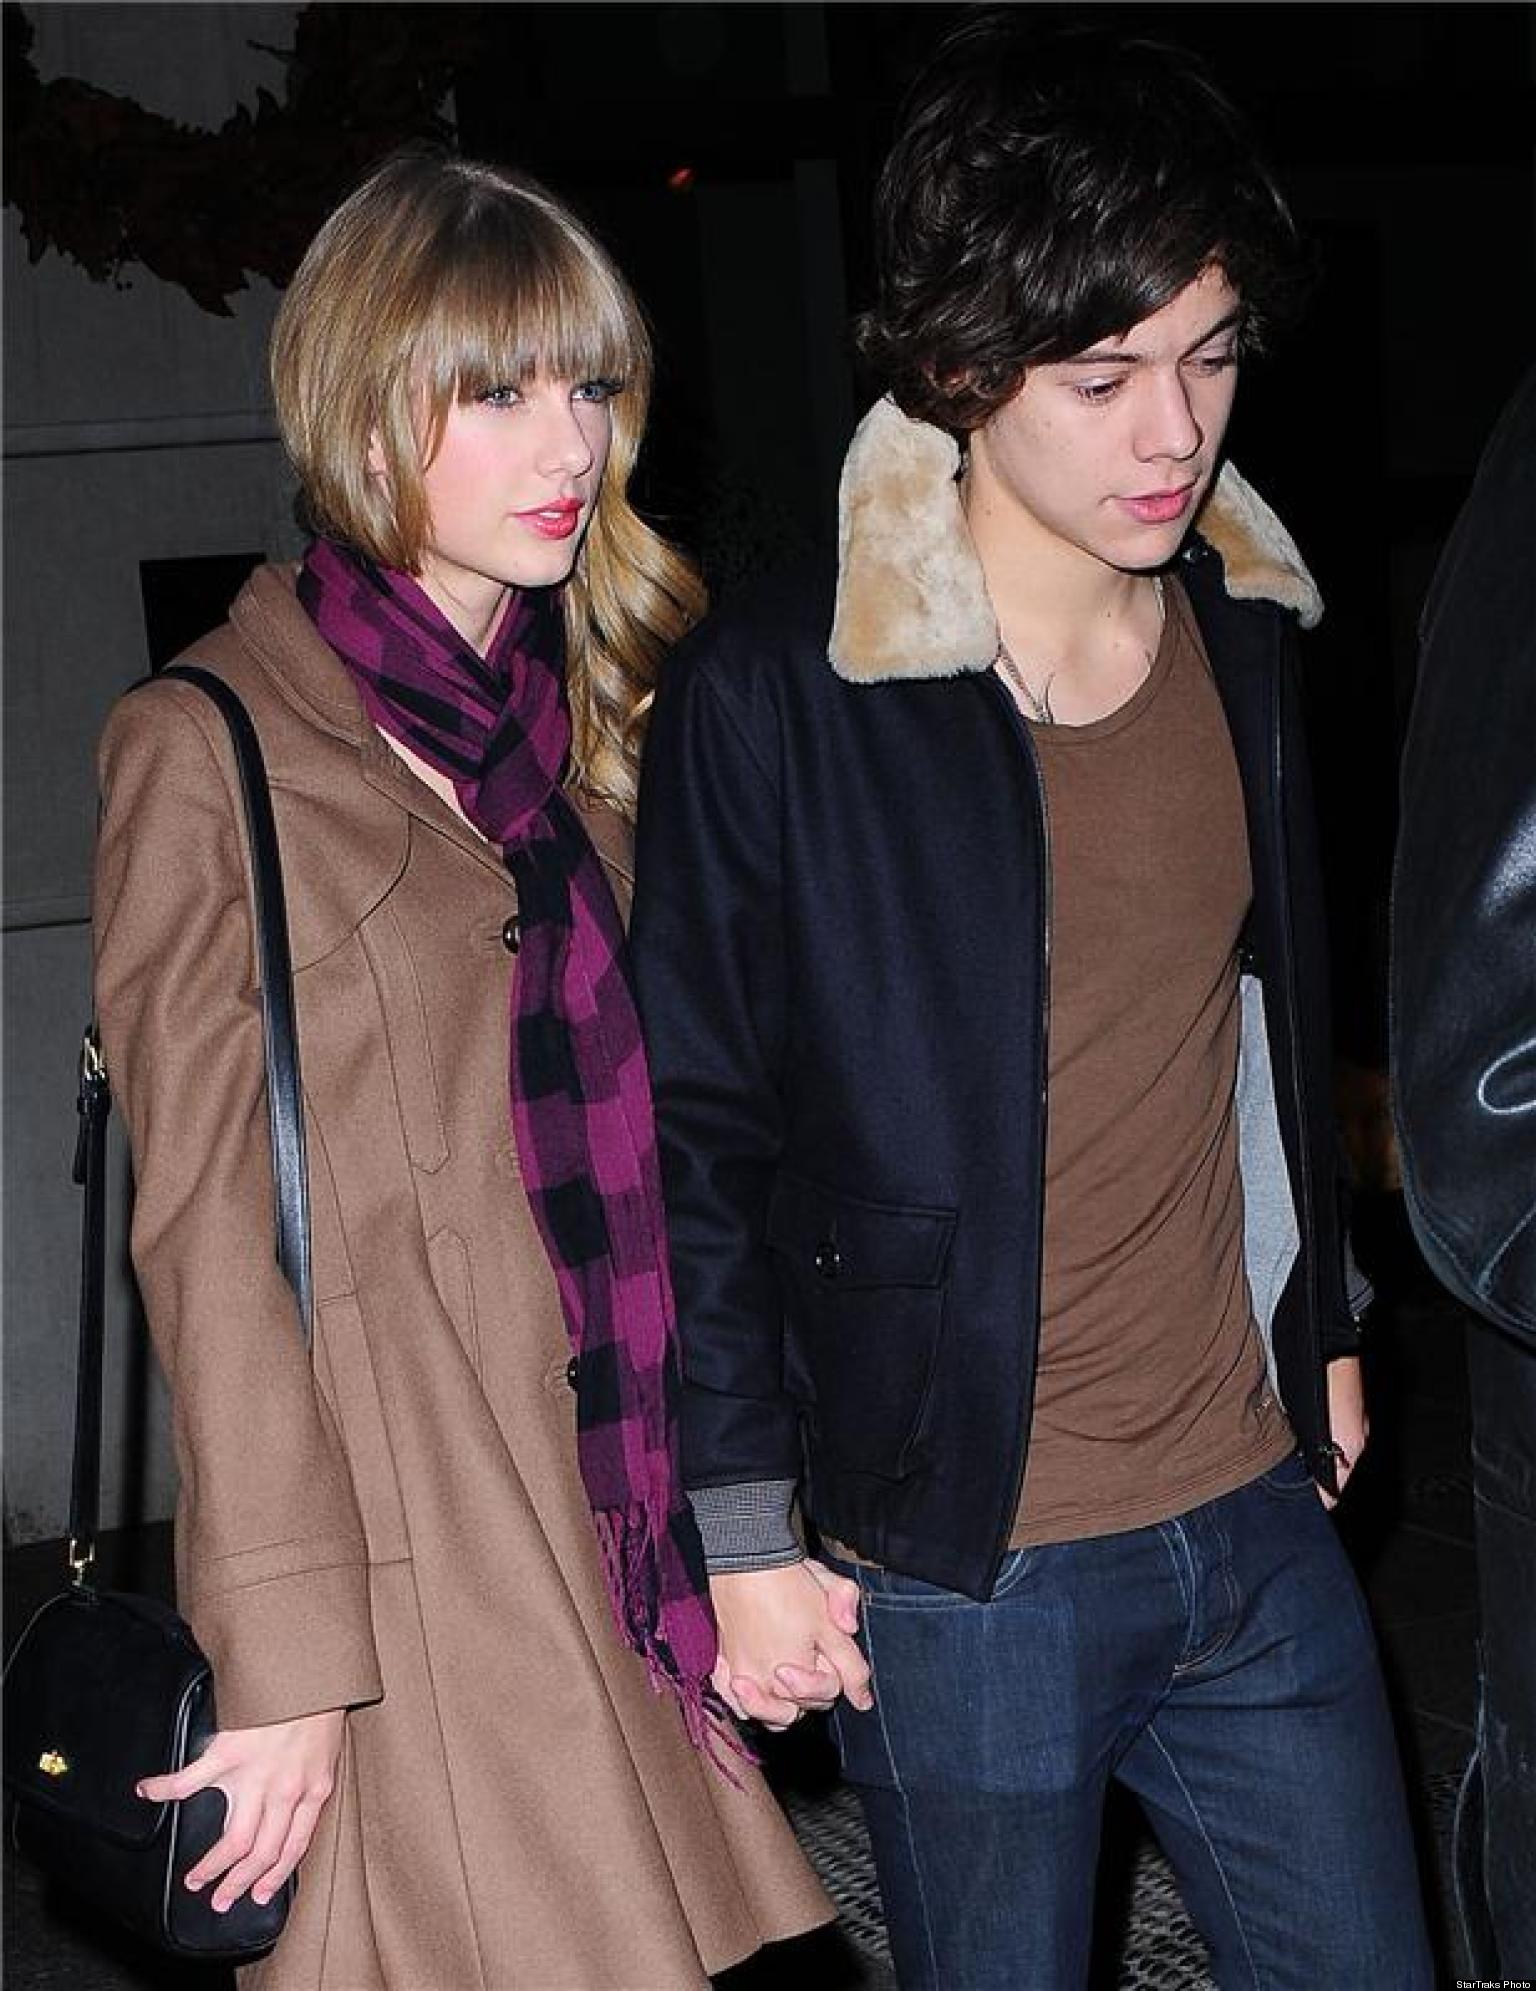 Haylor In London: Taylor Swift And Harry Styles Spotted Together In England (PHOTOS ...